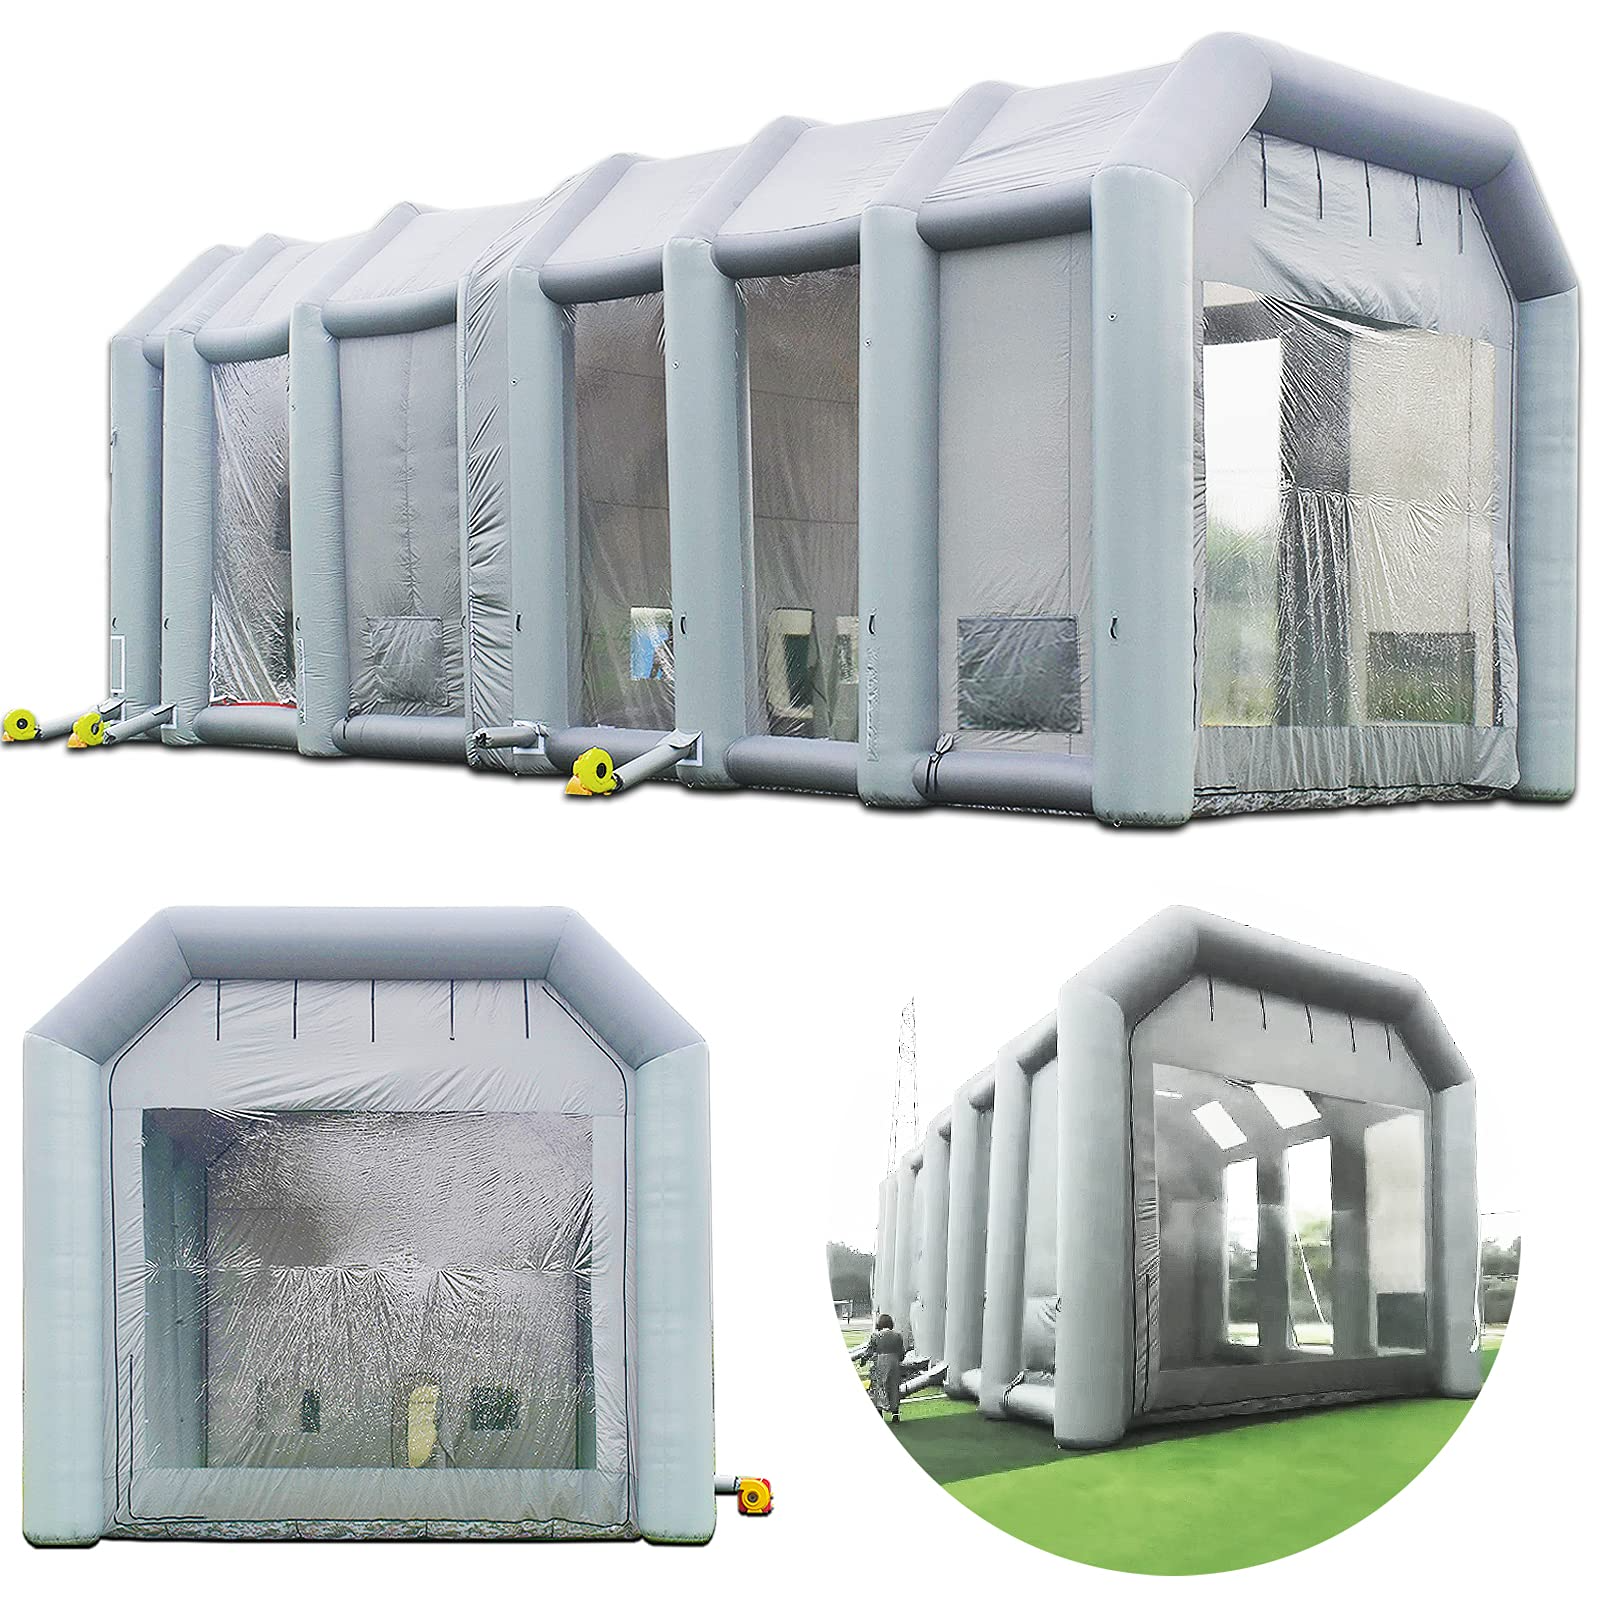 Sewinfla Professional Inflatable Paint Booth 56X25X20Ft/17X7.6X6m Environmentally-Friendly Air Filter System Portable Paint Booth More Durable Inflatable Spray Booth with Powerful Blowers